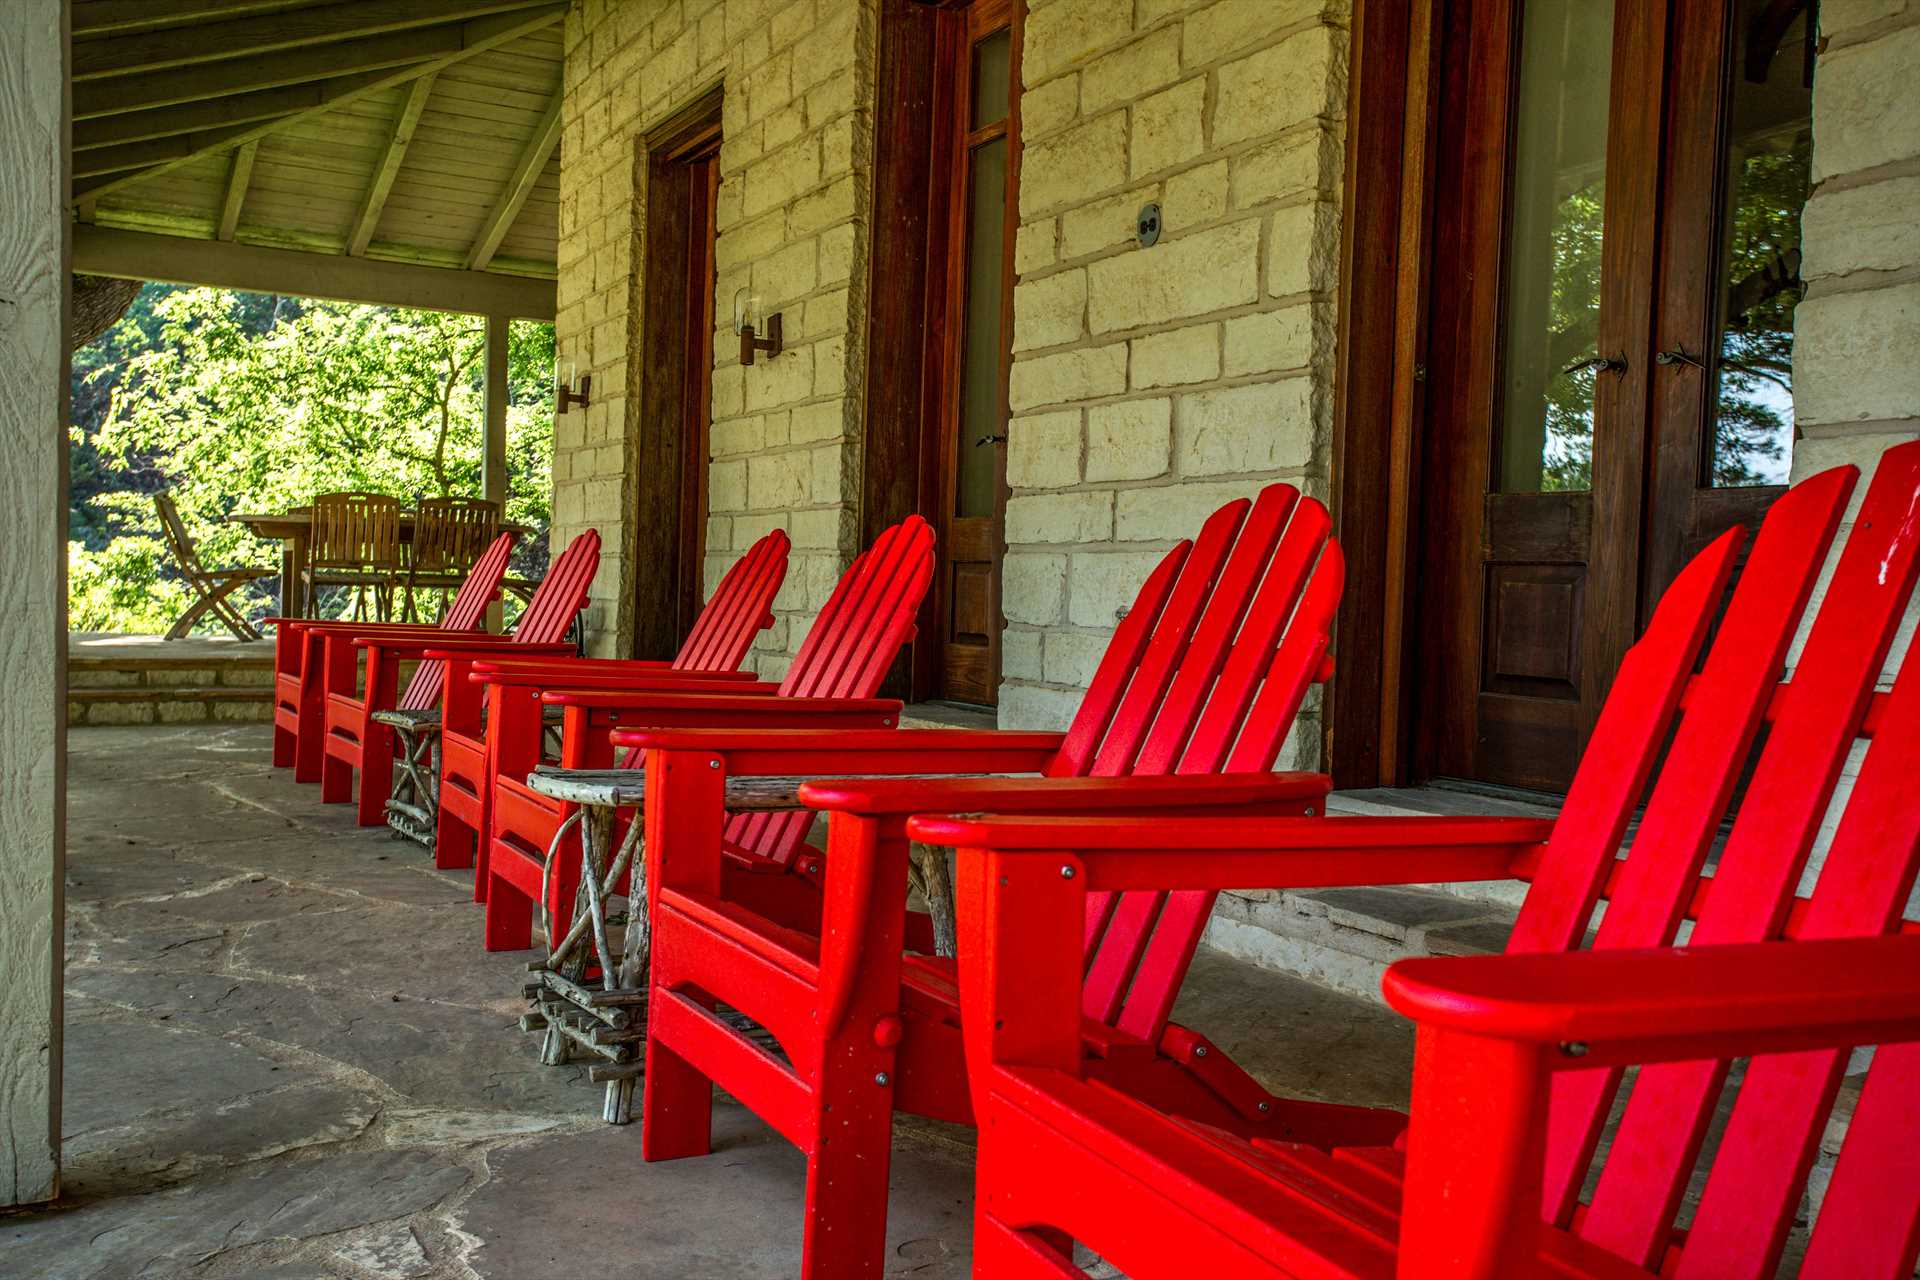                                                 Colorful Adirondack chairs on the Homestead patio provide a perfect perch for wildlife watching and taking in the Hill Country views!